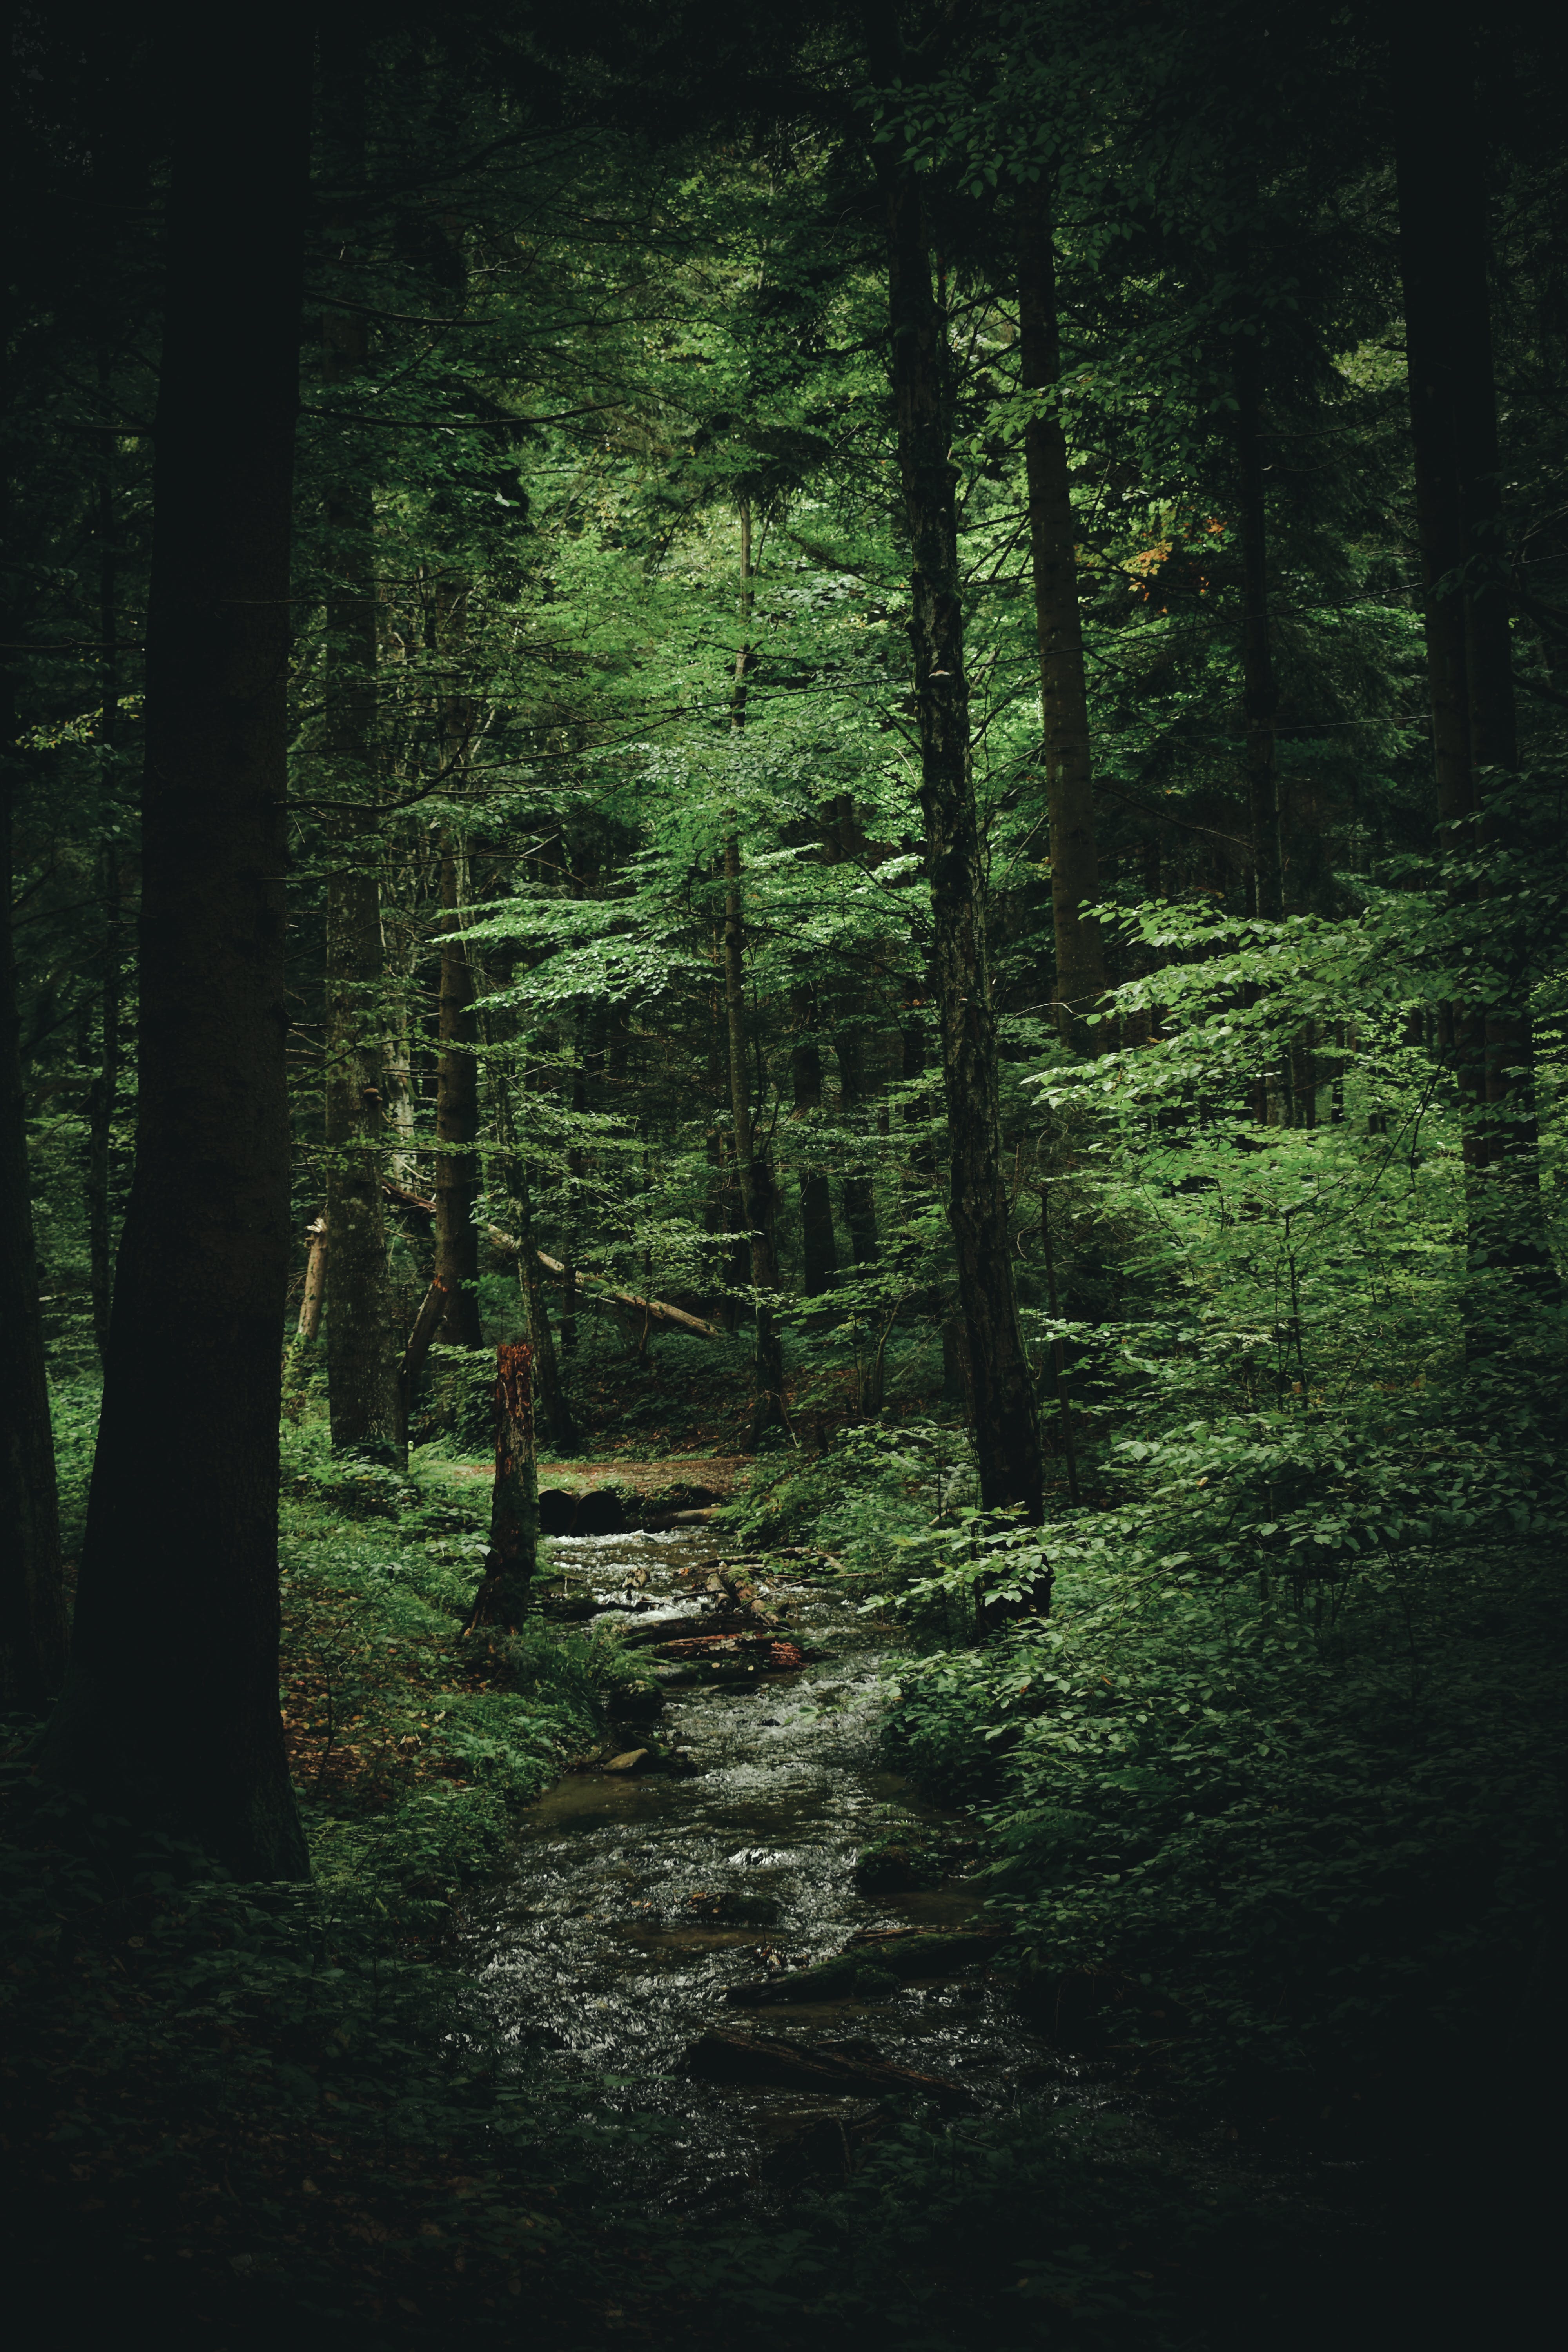 A dark forest with a small stream running through it. - Woods